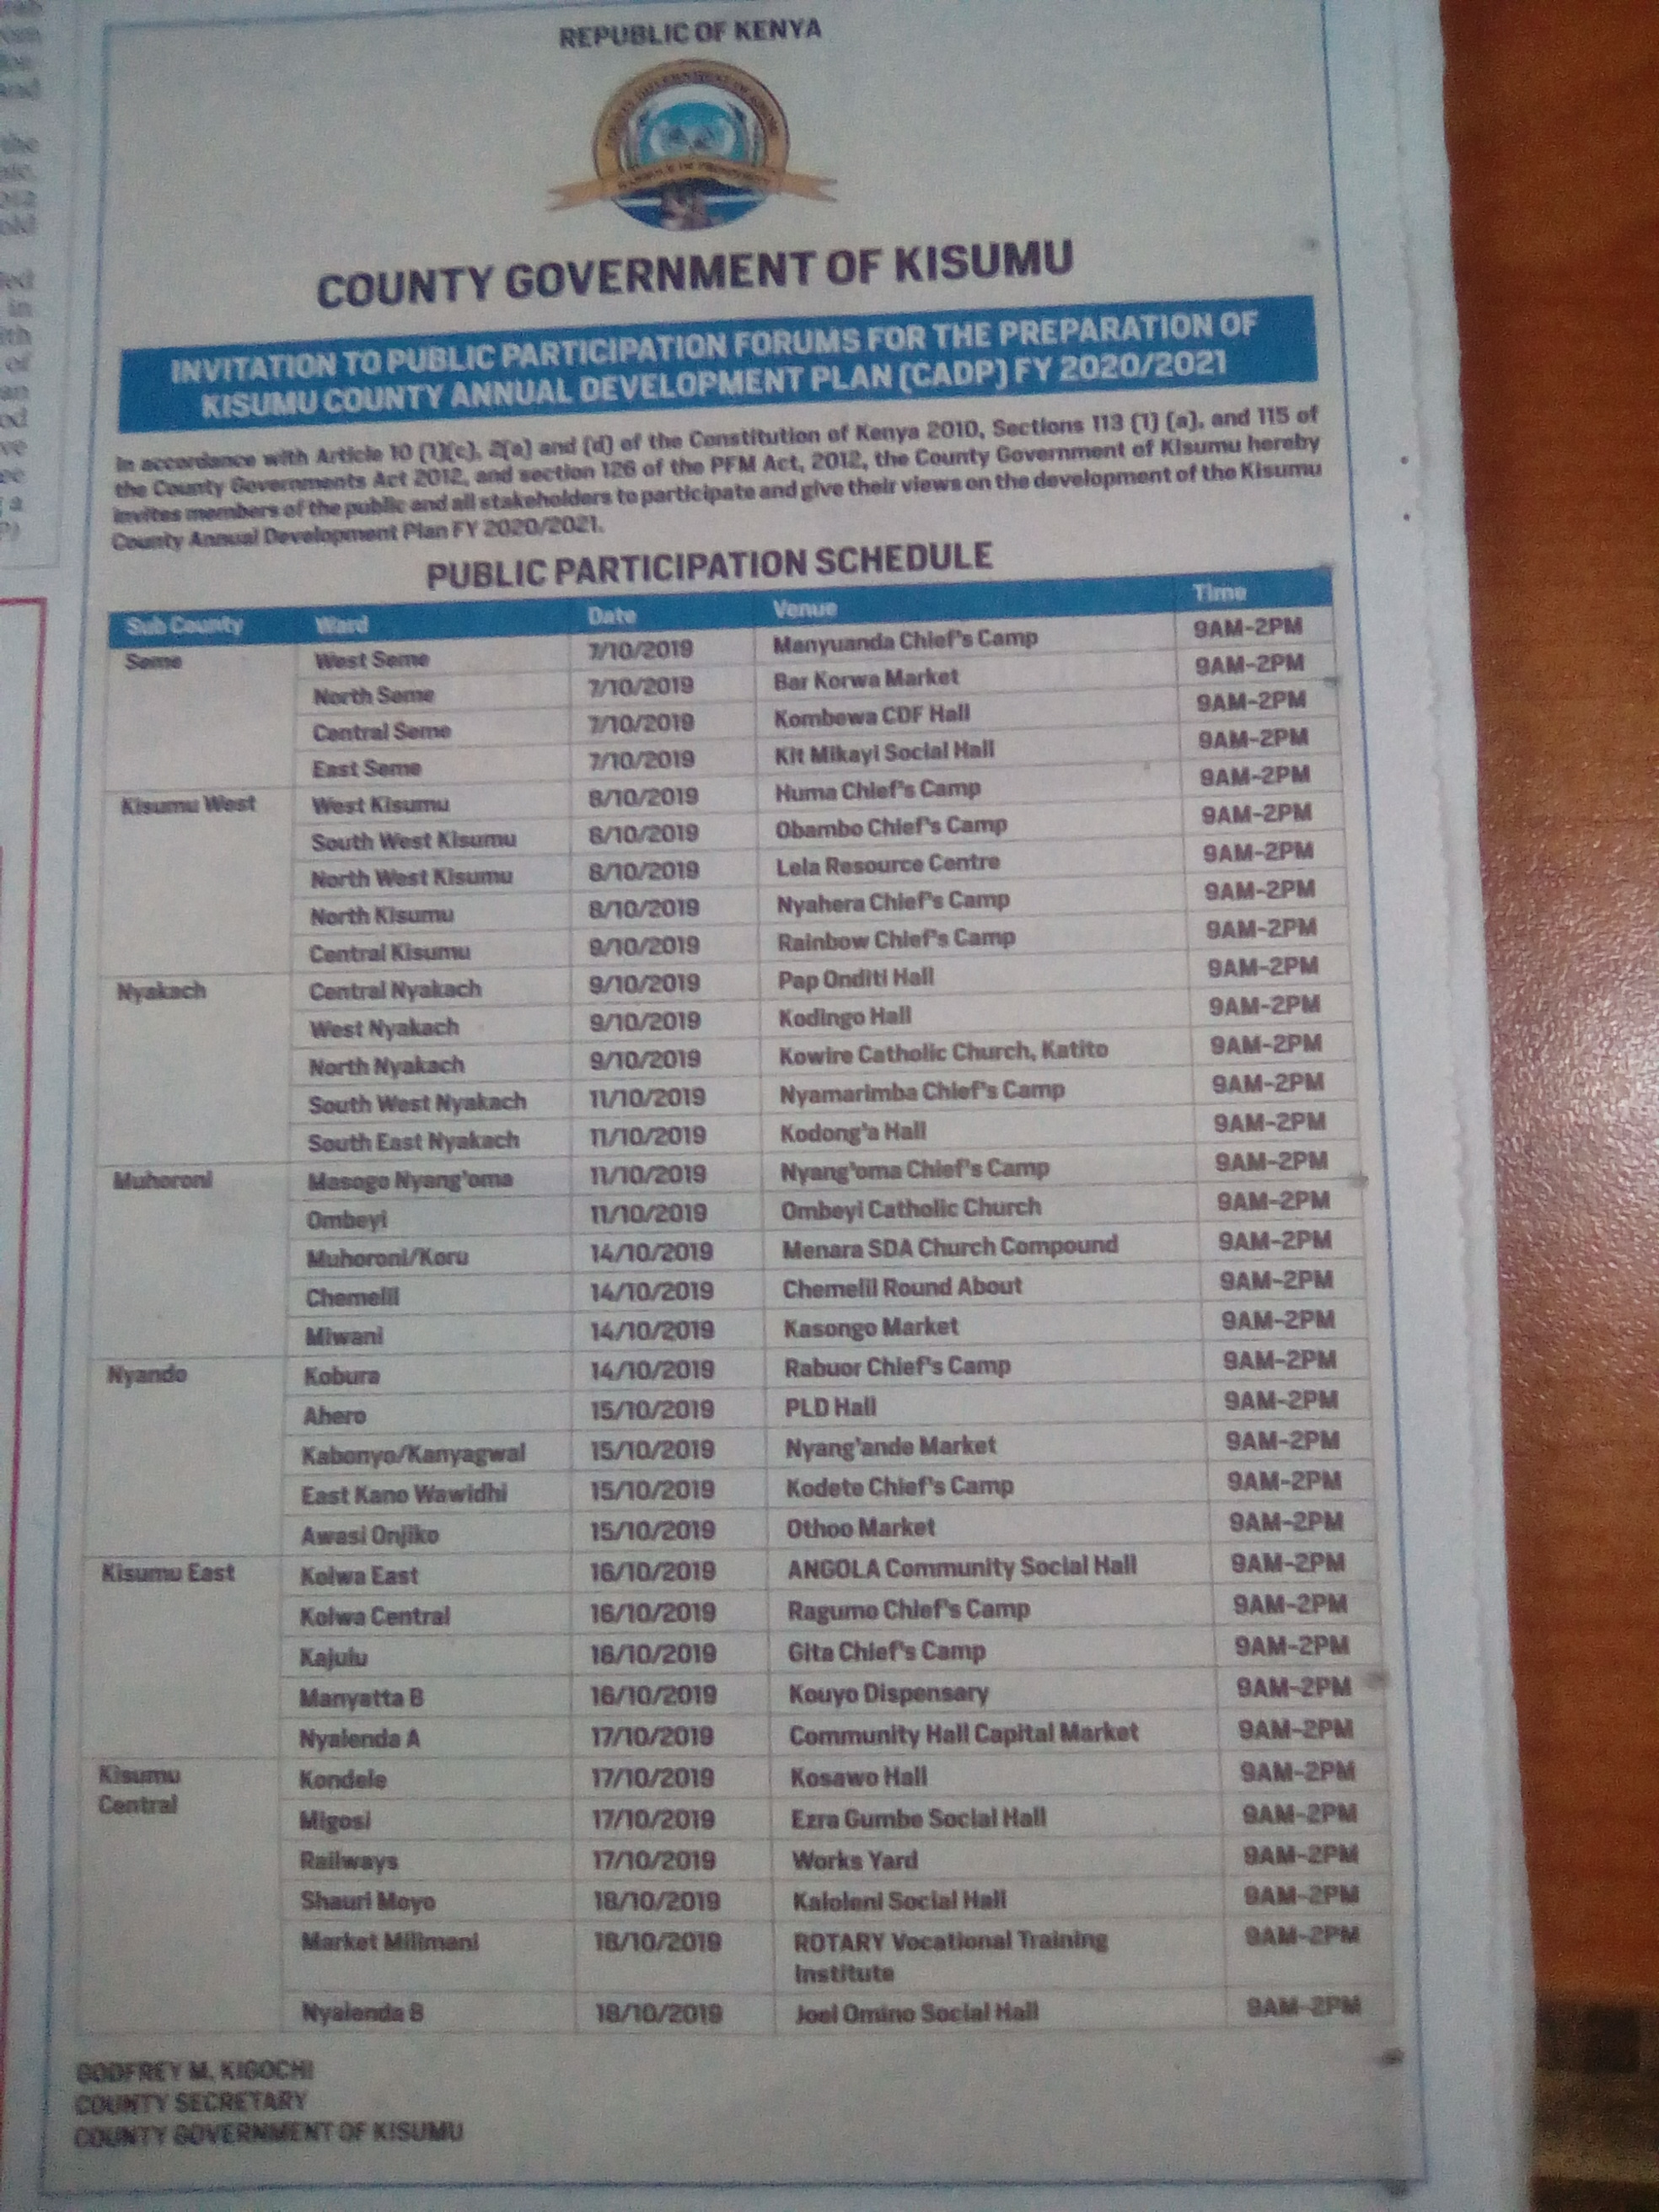 Call for public participation on Kisumu County ADP 2020/2021